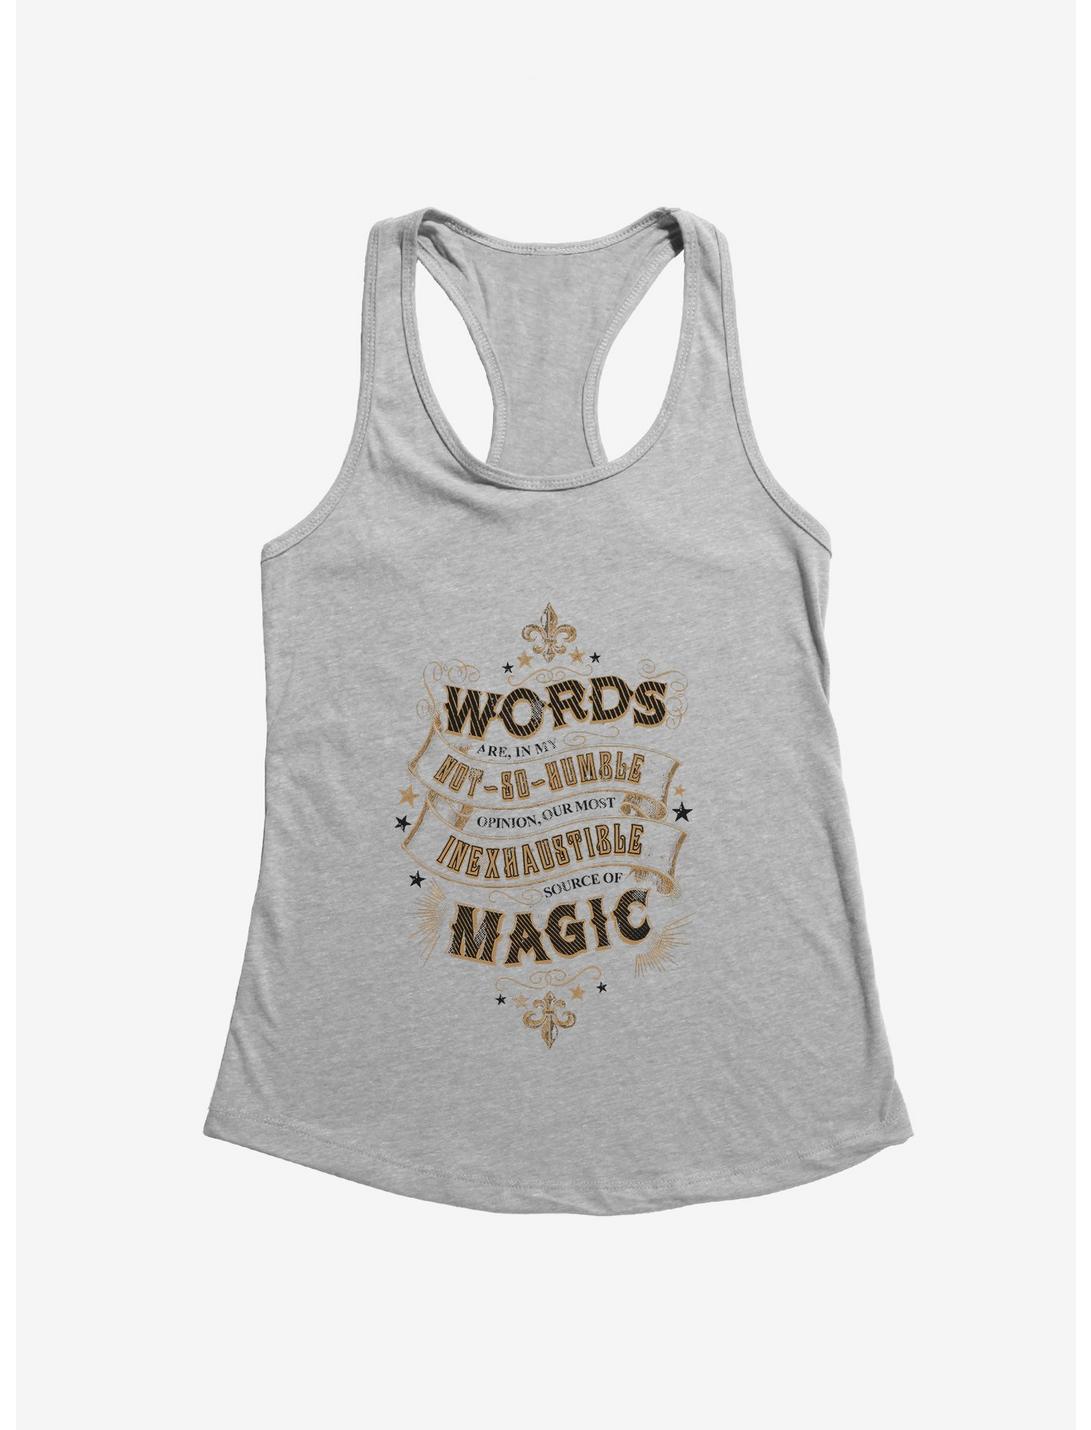 Harry Potter Words Are Magic Quote Girls Tank, , hi-res